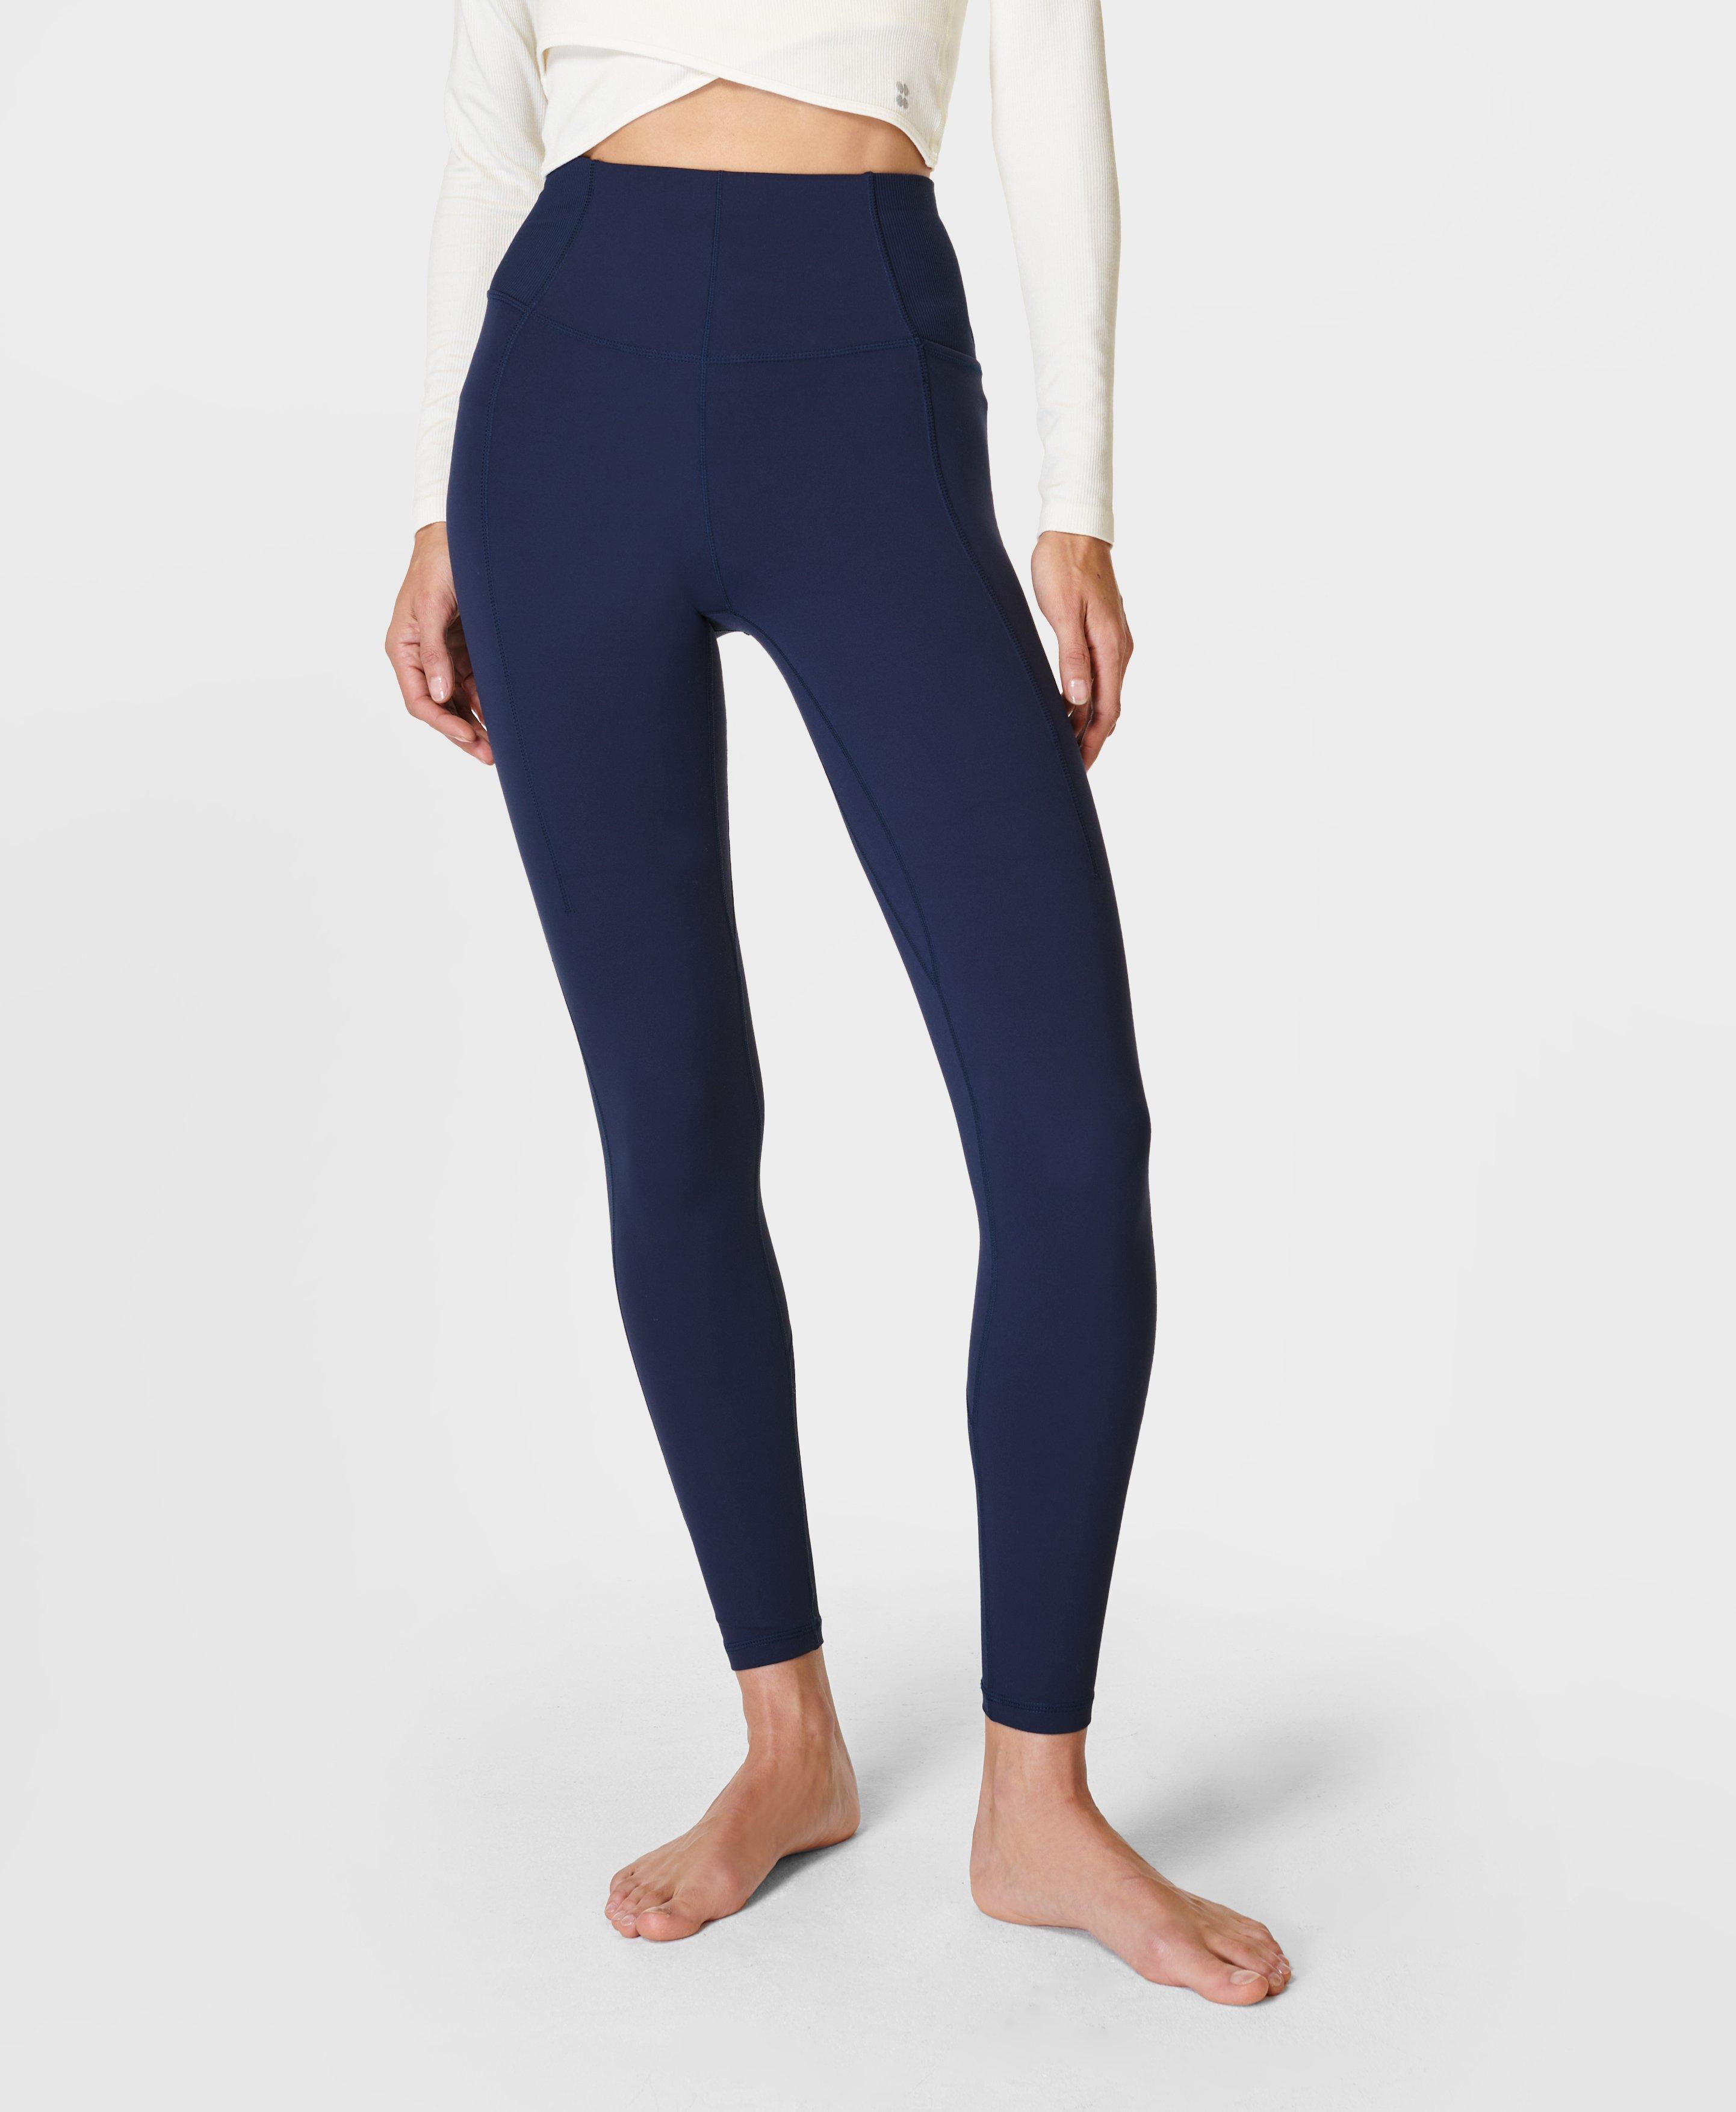 Nasty Gal Womens Seamless Ribbed Workout Leggings - ShopStyle